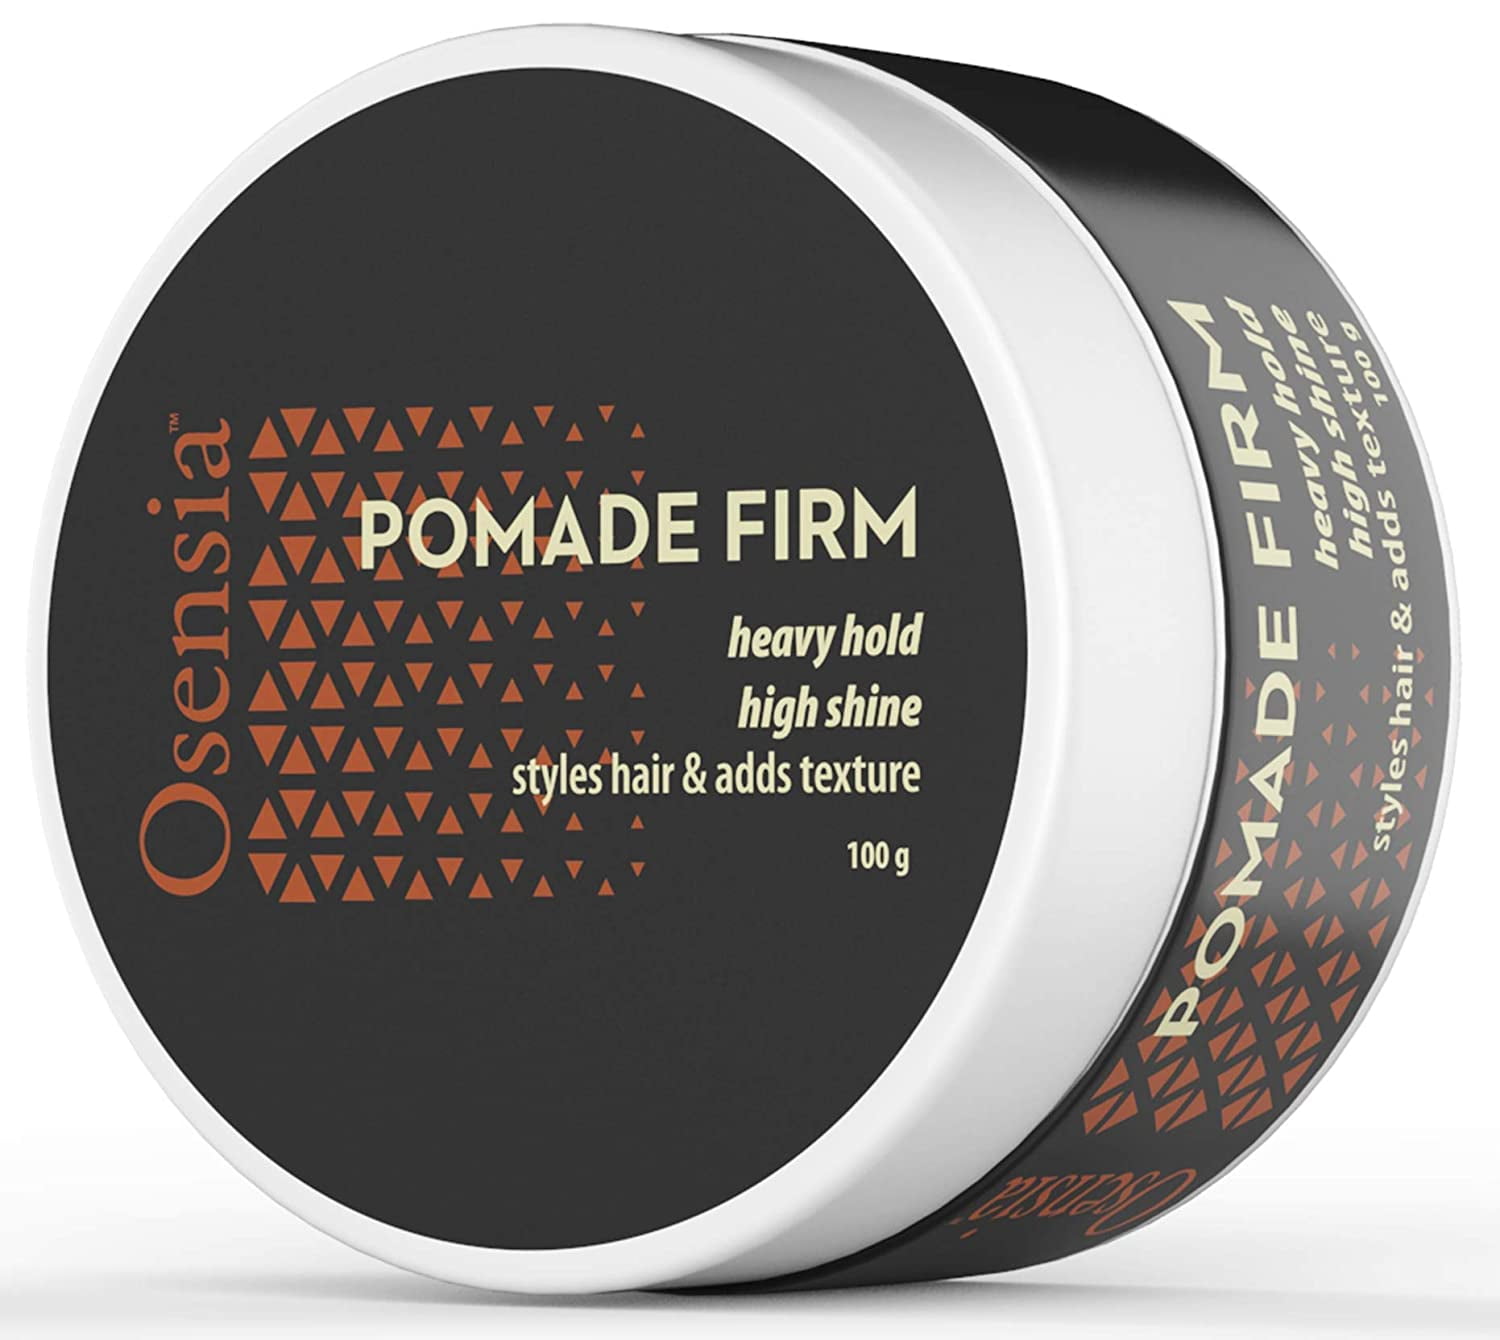 Pomade Firm Strong Hold Hair Wax - High Shine, High Hold Pomade for Men -  Styling Gel, No Flakes or Residue, Washes Out Easy - Alcohol and Paraben  Free Water Based Pomade